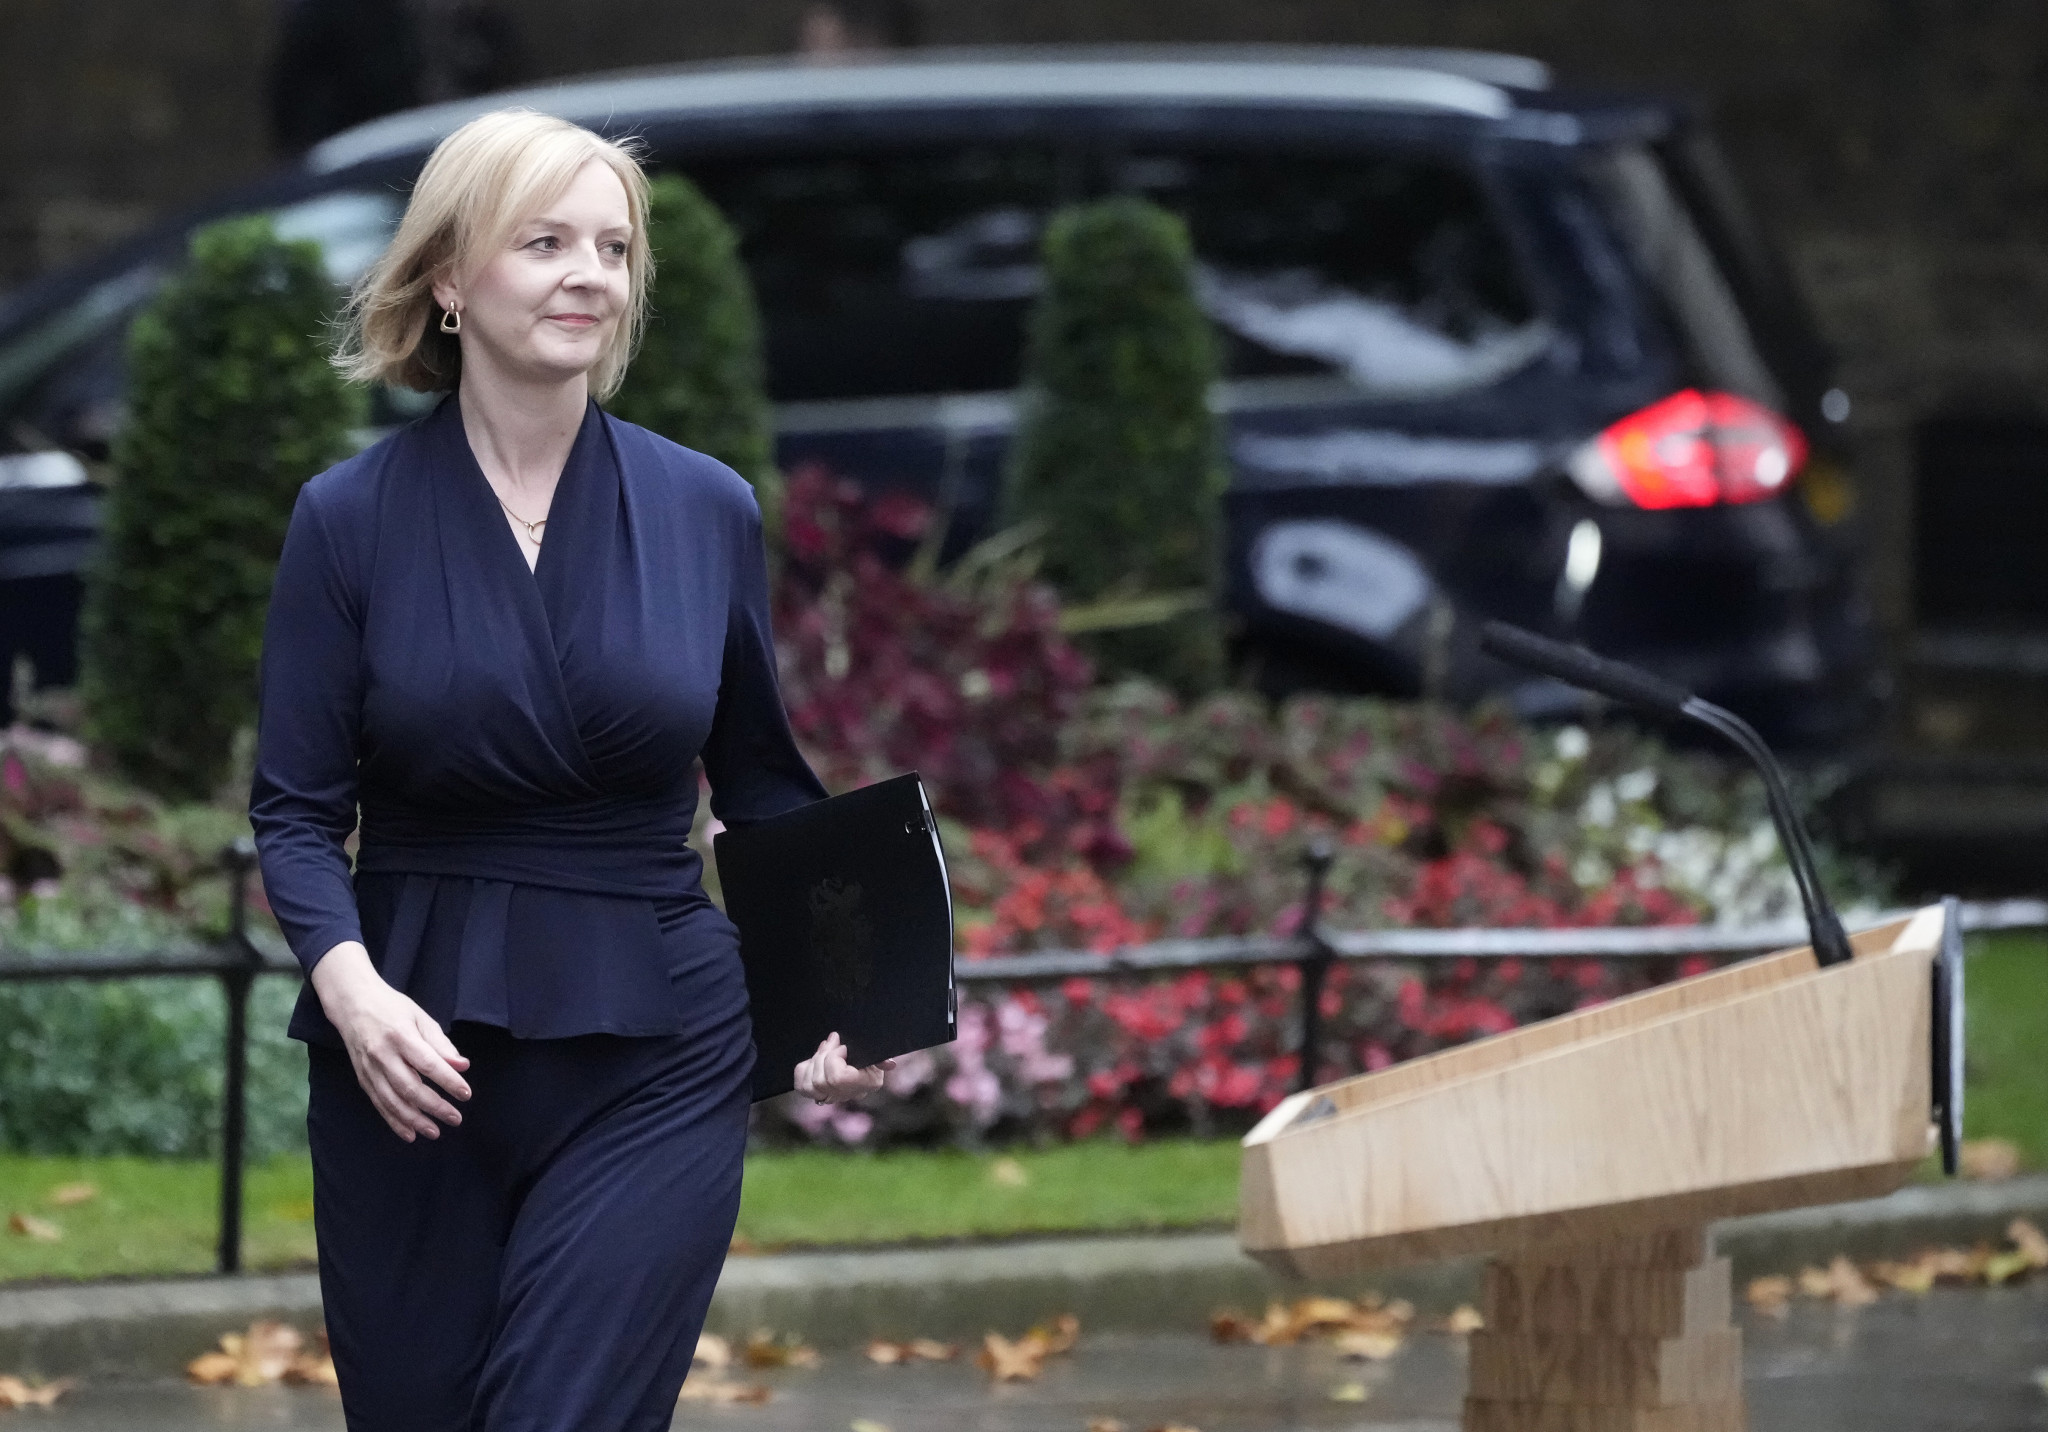 New British Prime Minister Liz Truss does not appear the particularly sporty type according to our columnist ©Getty Images